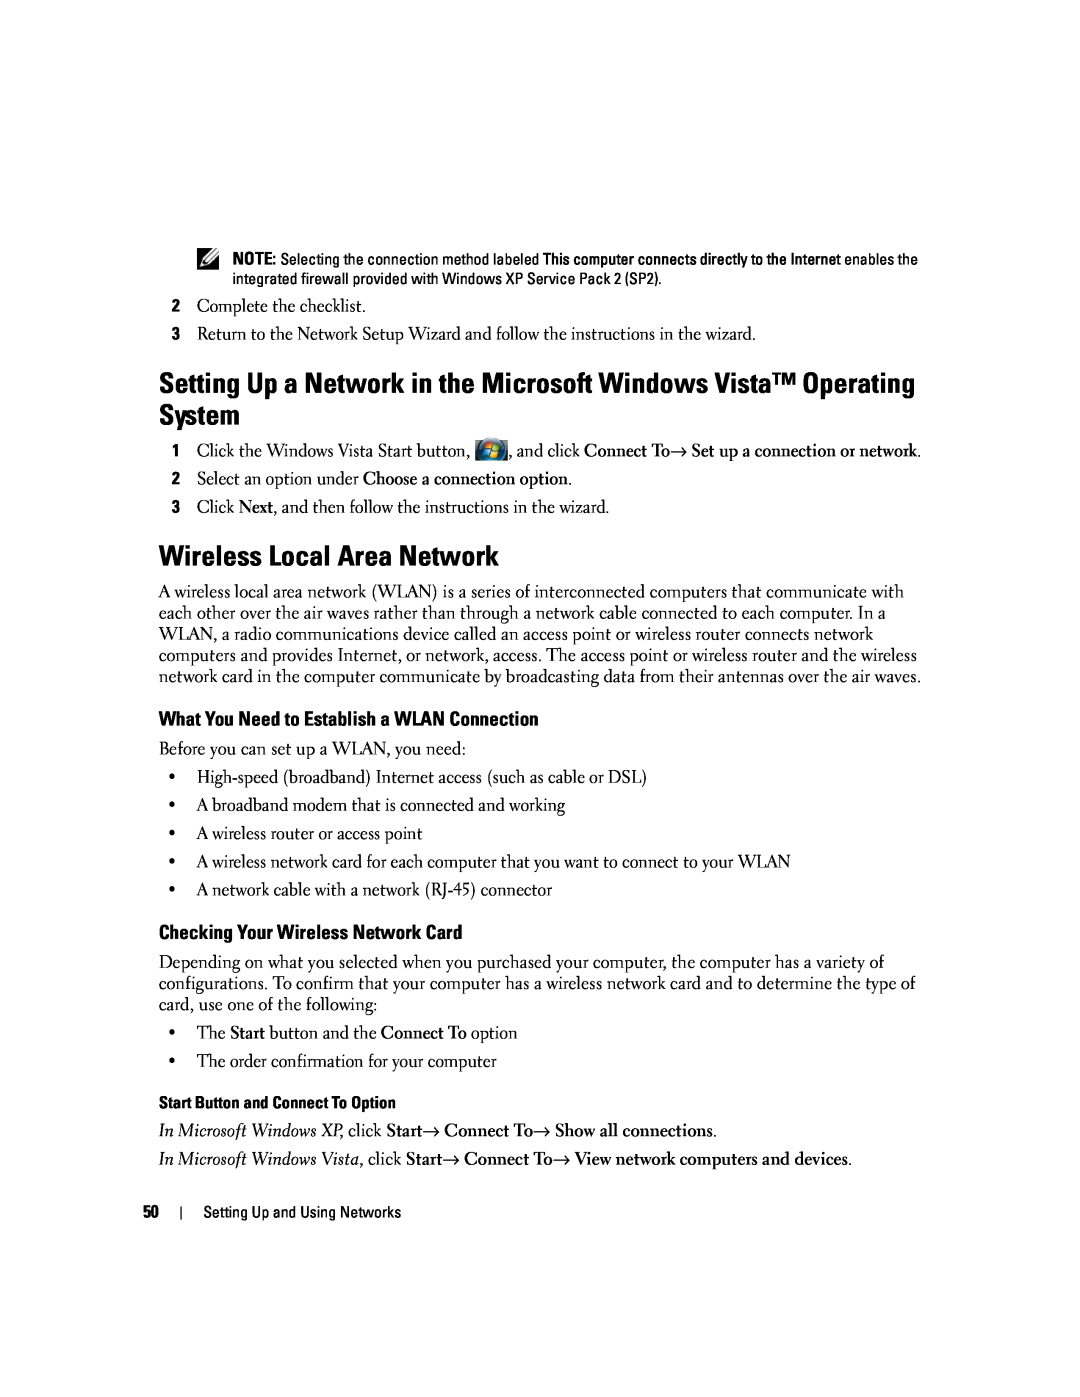 Dell PP24L manual Setting Up a Network in the Microsoft Windows Vista Operating System, Wireless Local Area Network 